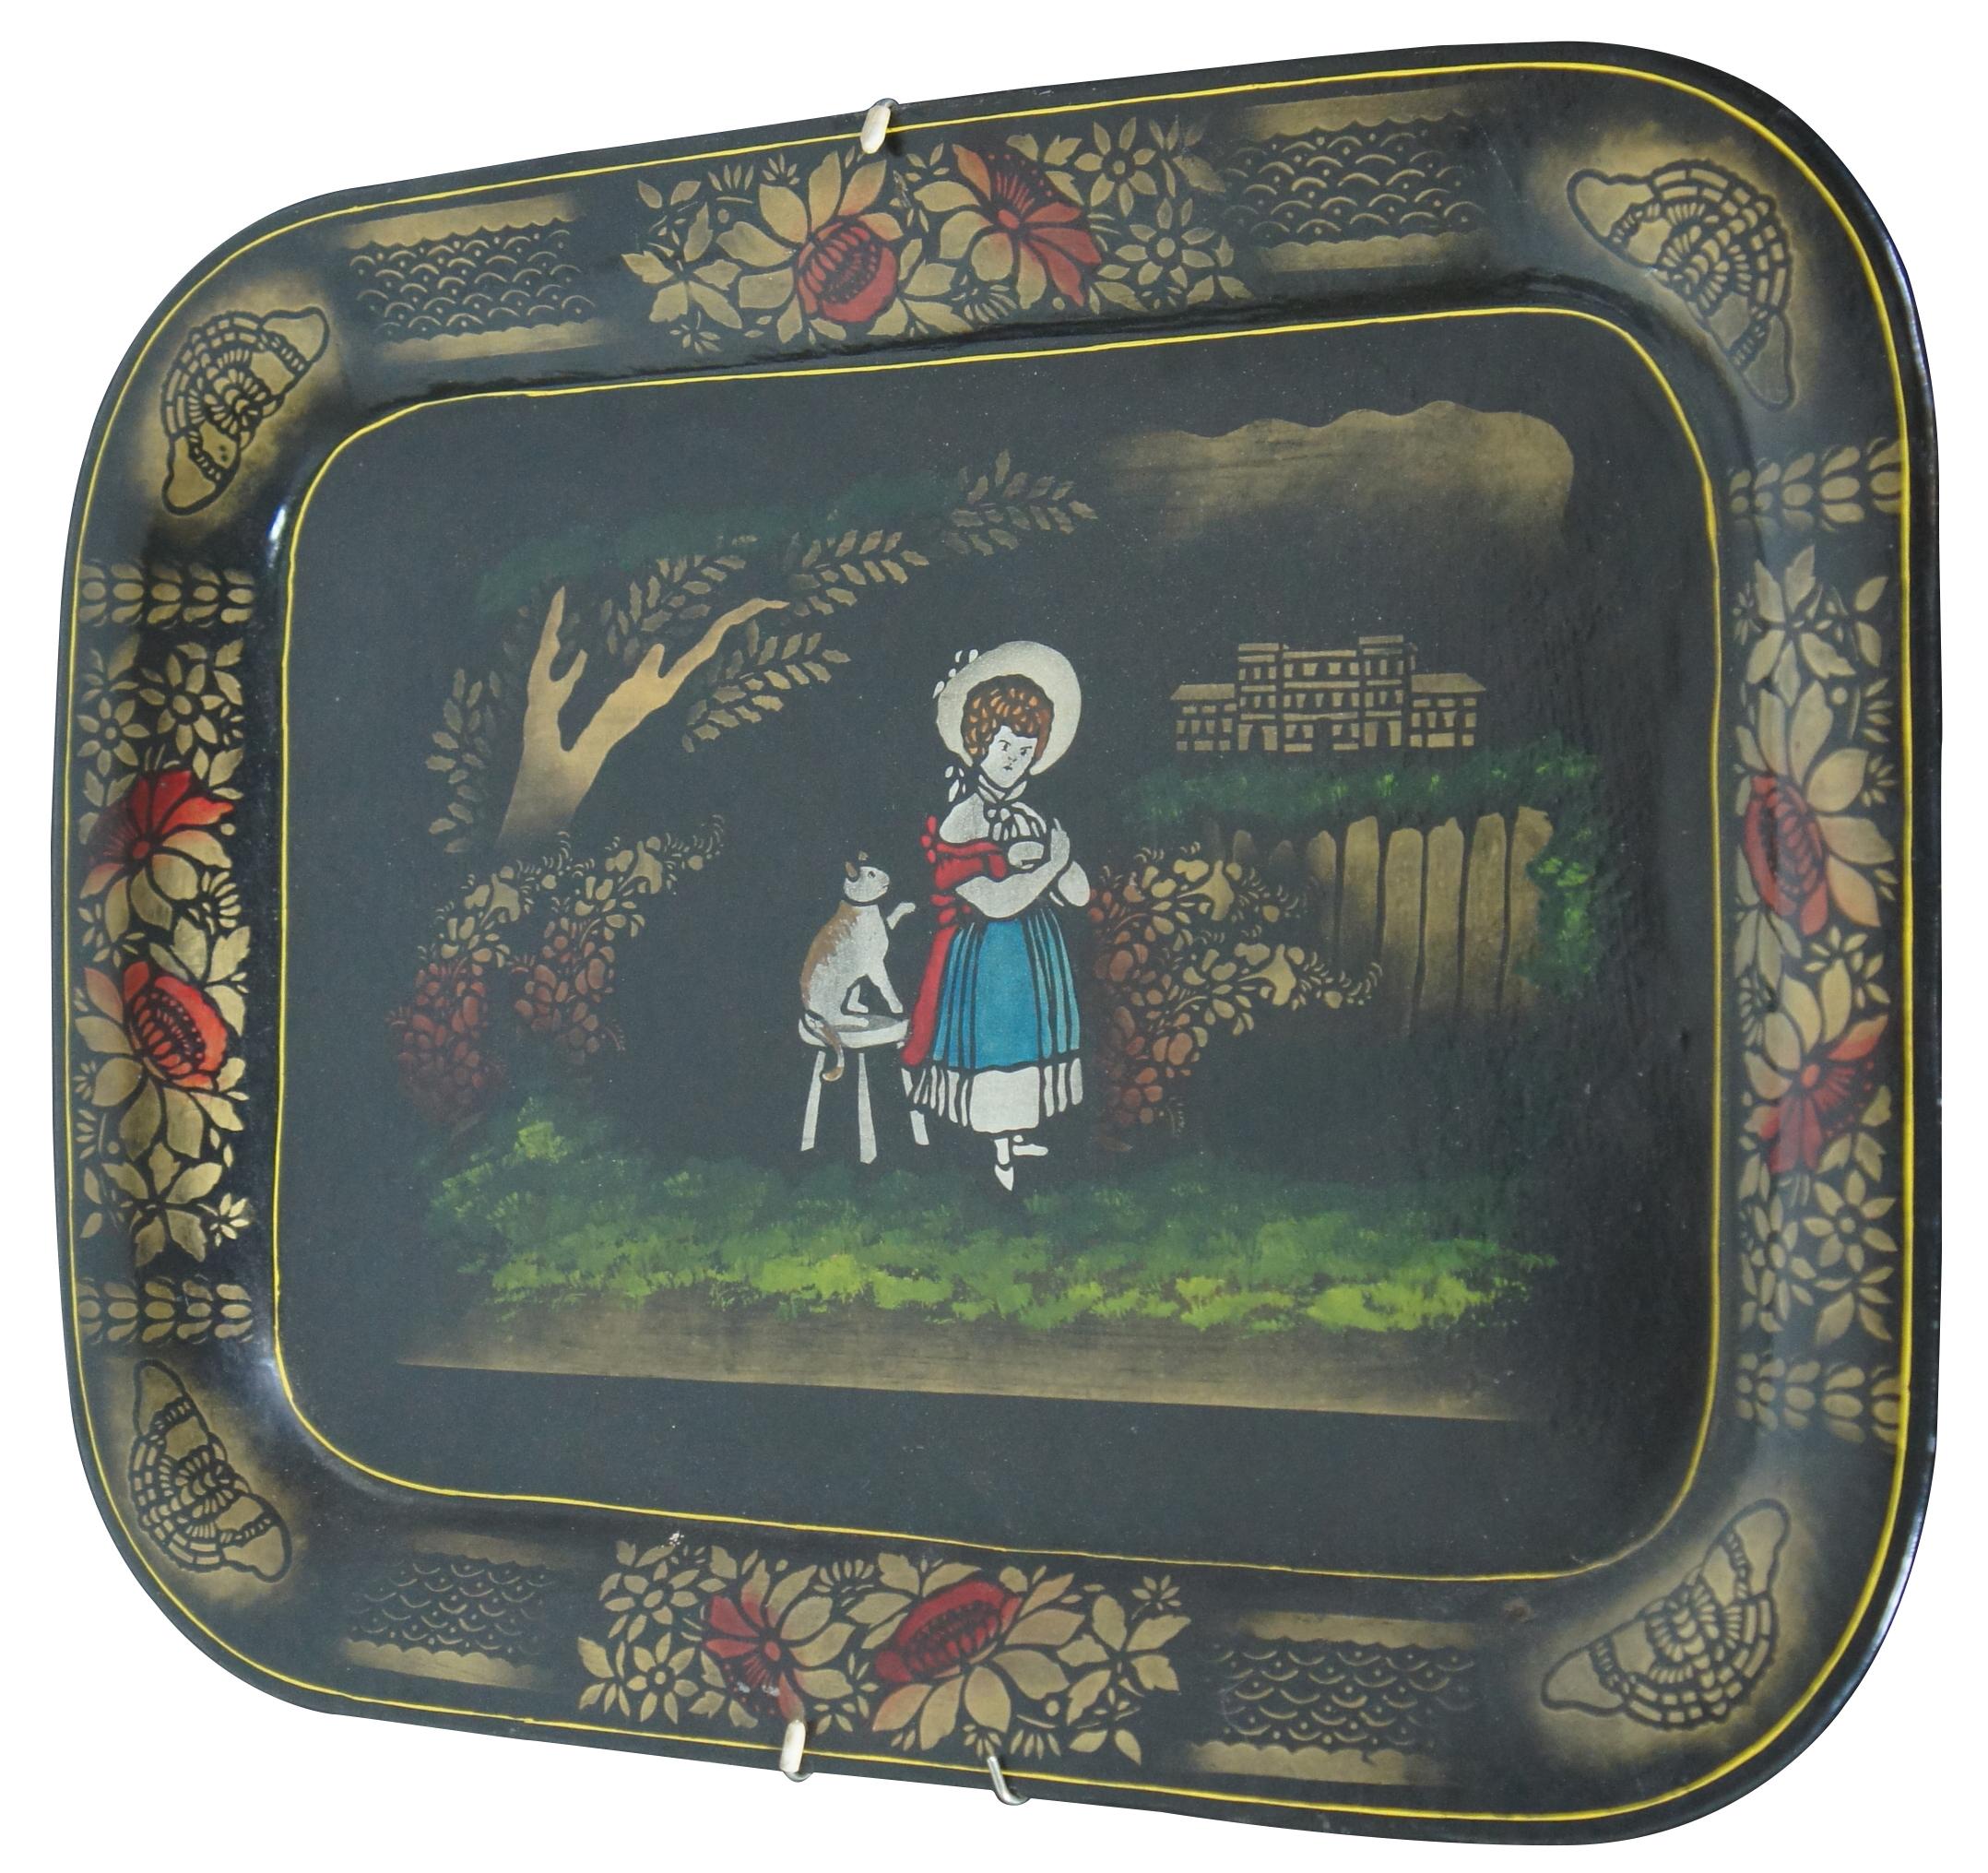 Vintage Americana Folk Art Toleware tray hand painted portrait on metal with a stenciled pastoral landscape featuring a grumpy young girl and a cat on stool, centered between a tree and fence with a grand house in the background. Detailed with